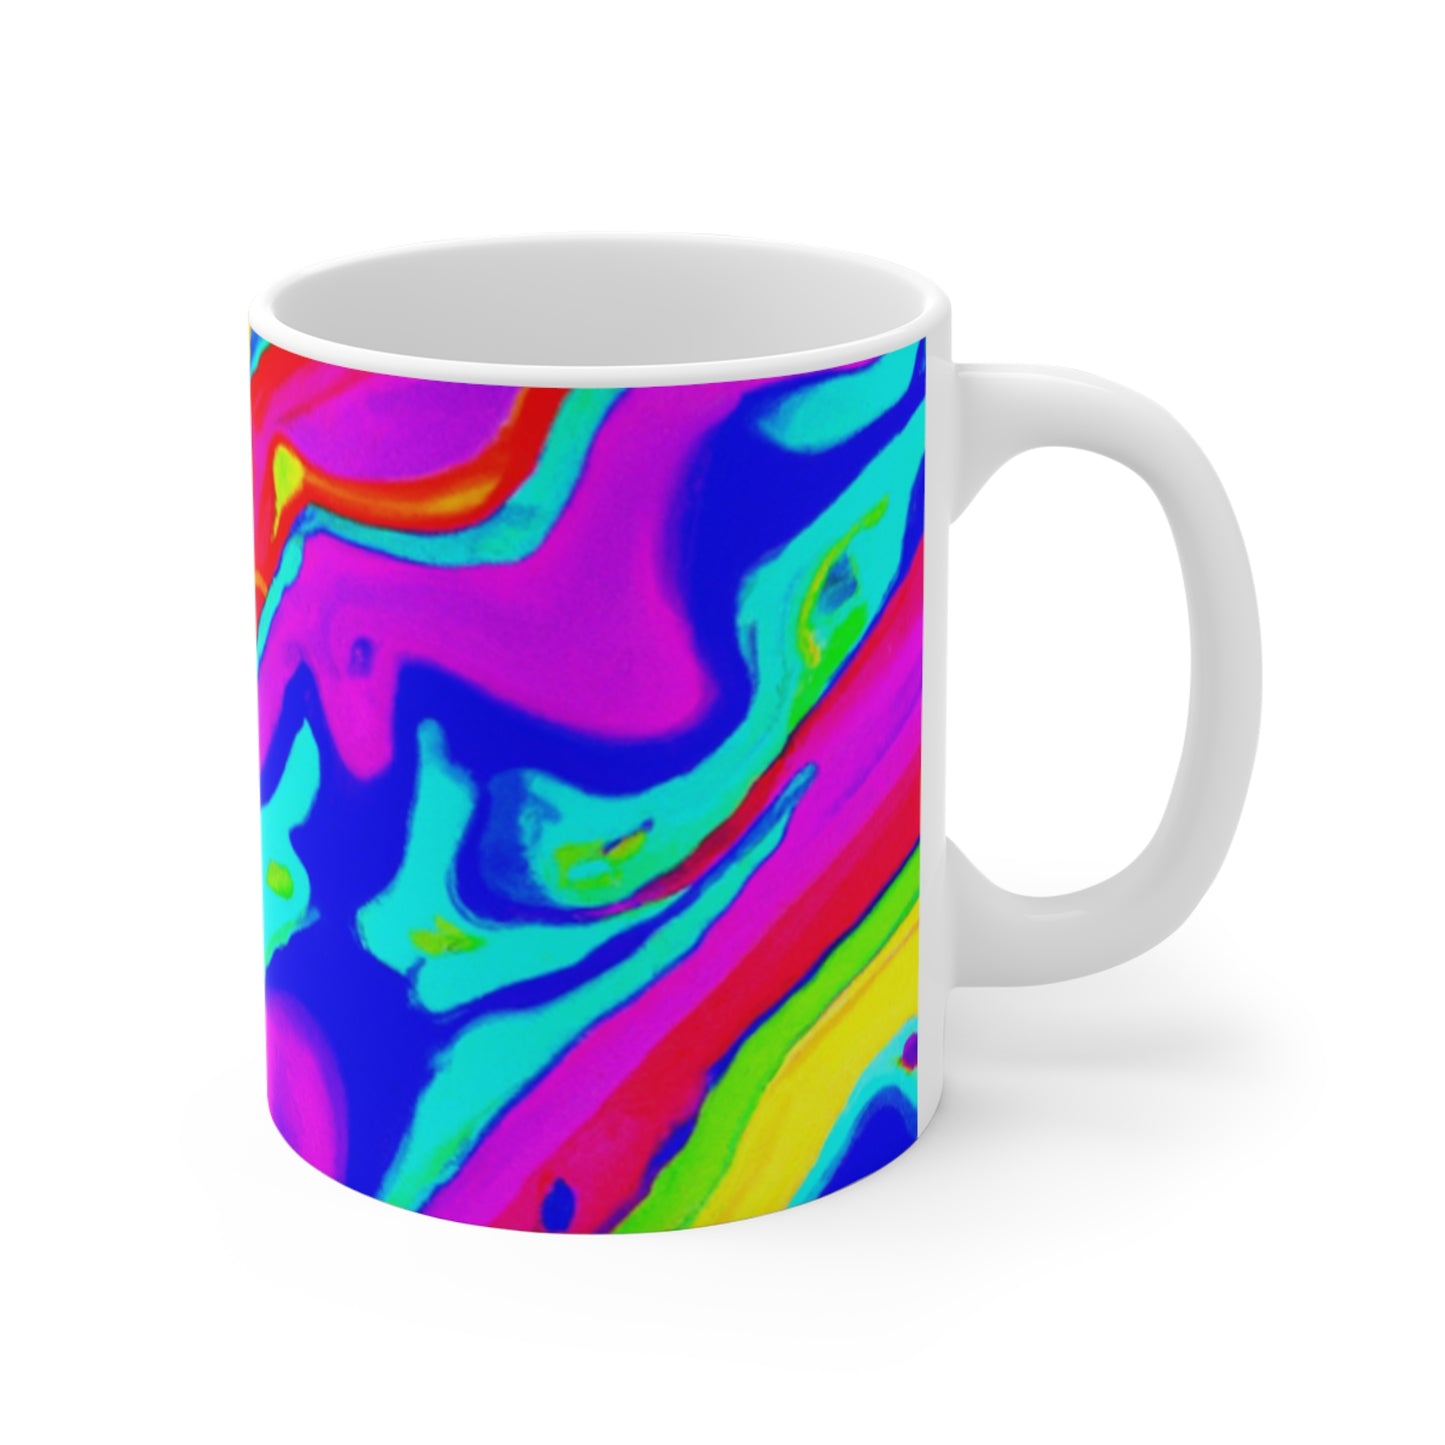 Winston's Deluxe Brews. - Psychedelic Coffee Cup Mug 11 Ounce